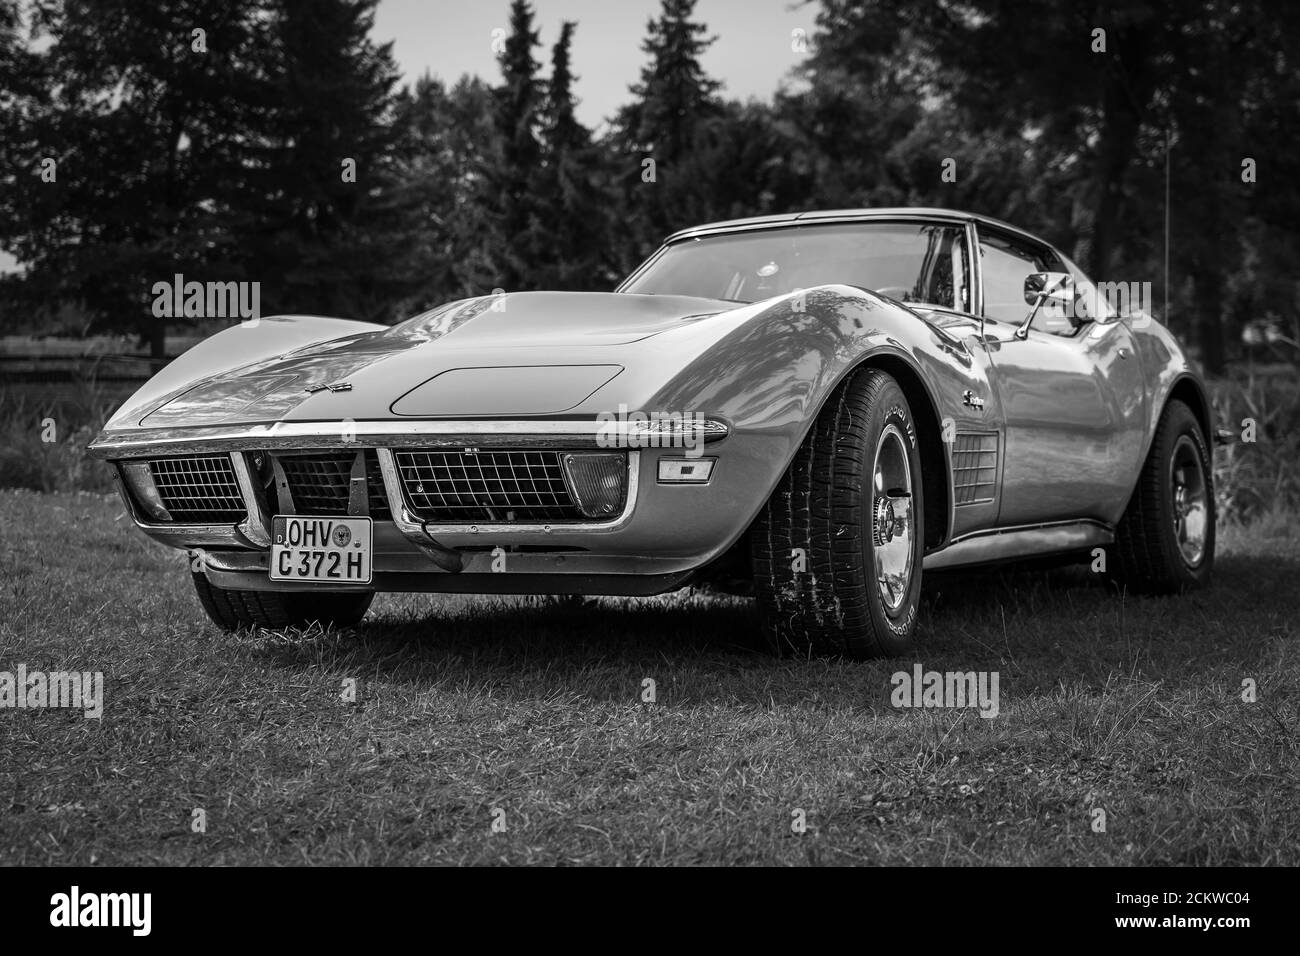 DIEDERSDORF, GERMANY - AUGUST 30, 2020: The sports car Chevrolet Corvette Stingray Coupe, 1972. Black and white. The exhibition of 'US Car Classics'. Stock Photo